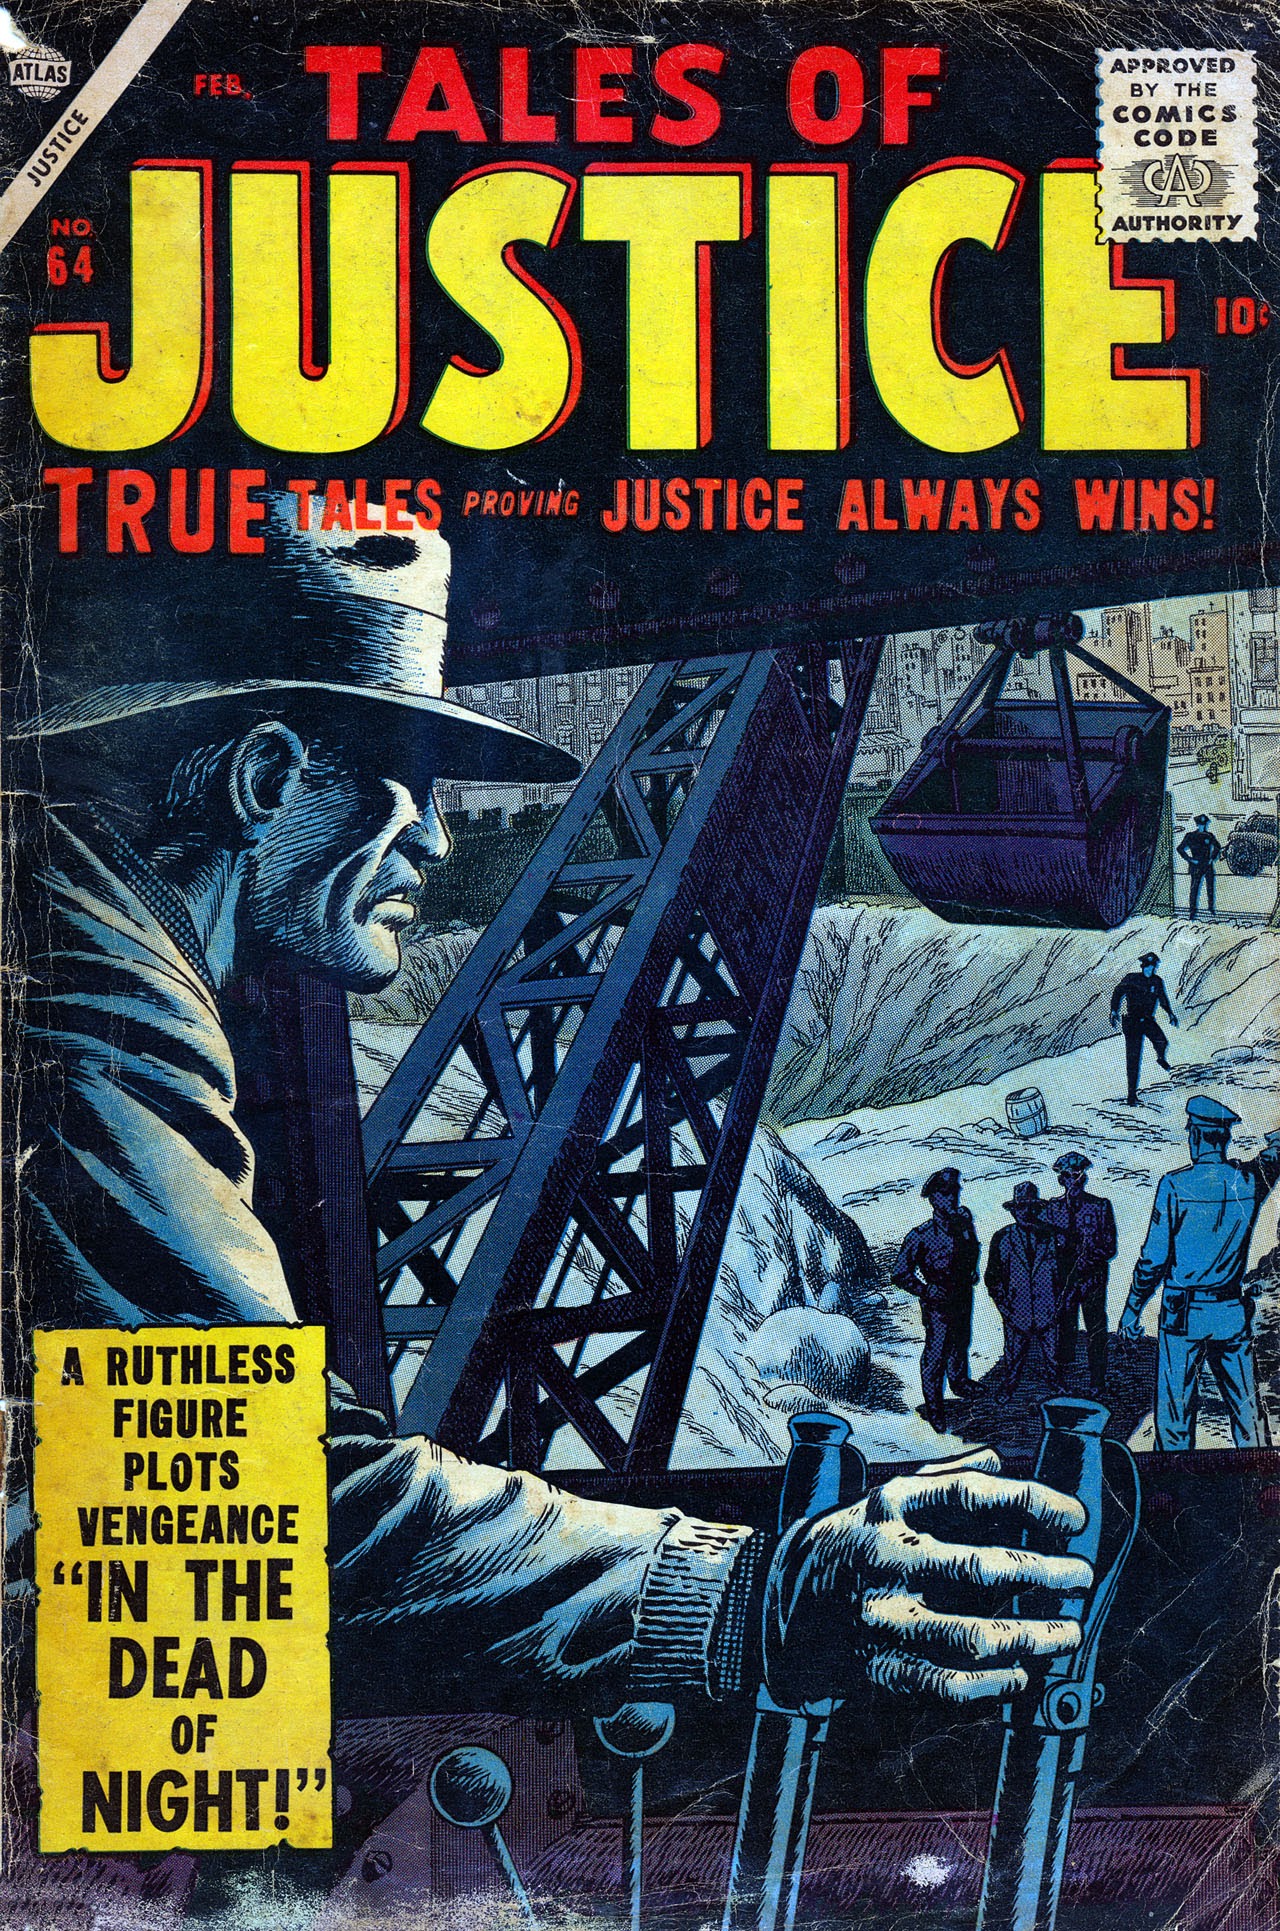 Read online Tales of Justice comic -  Issue #64 - 1